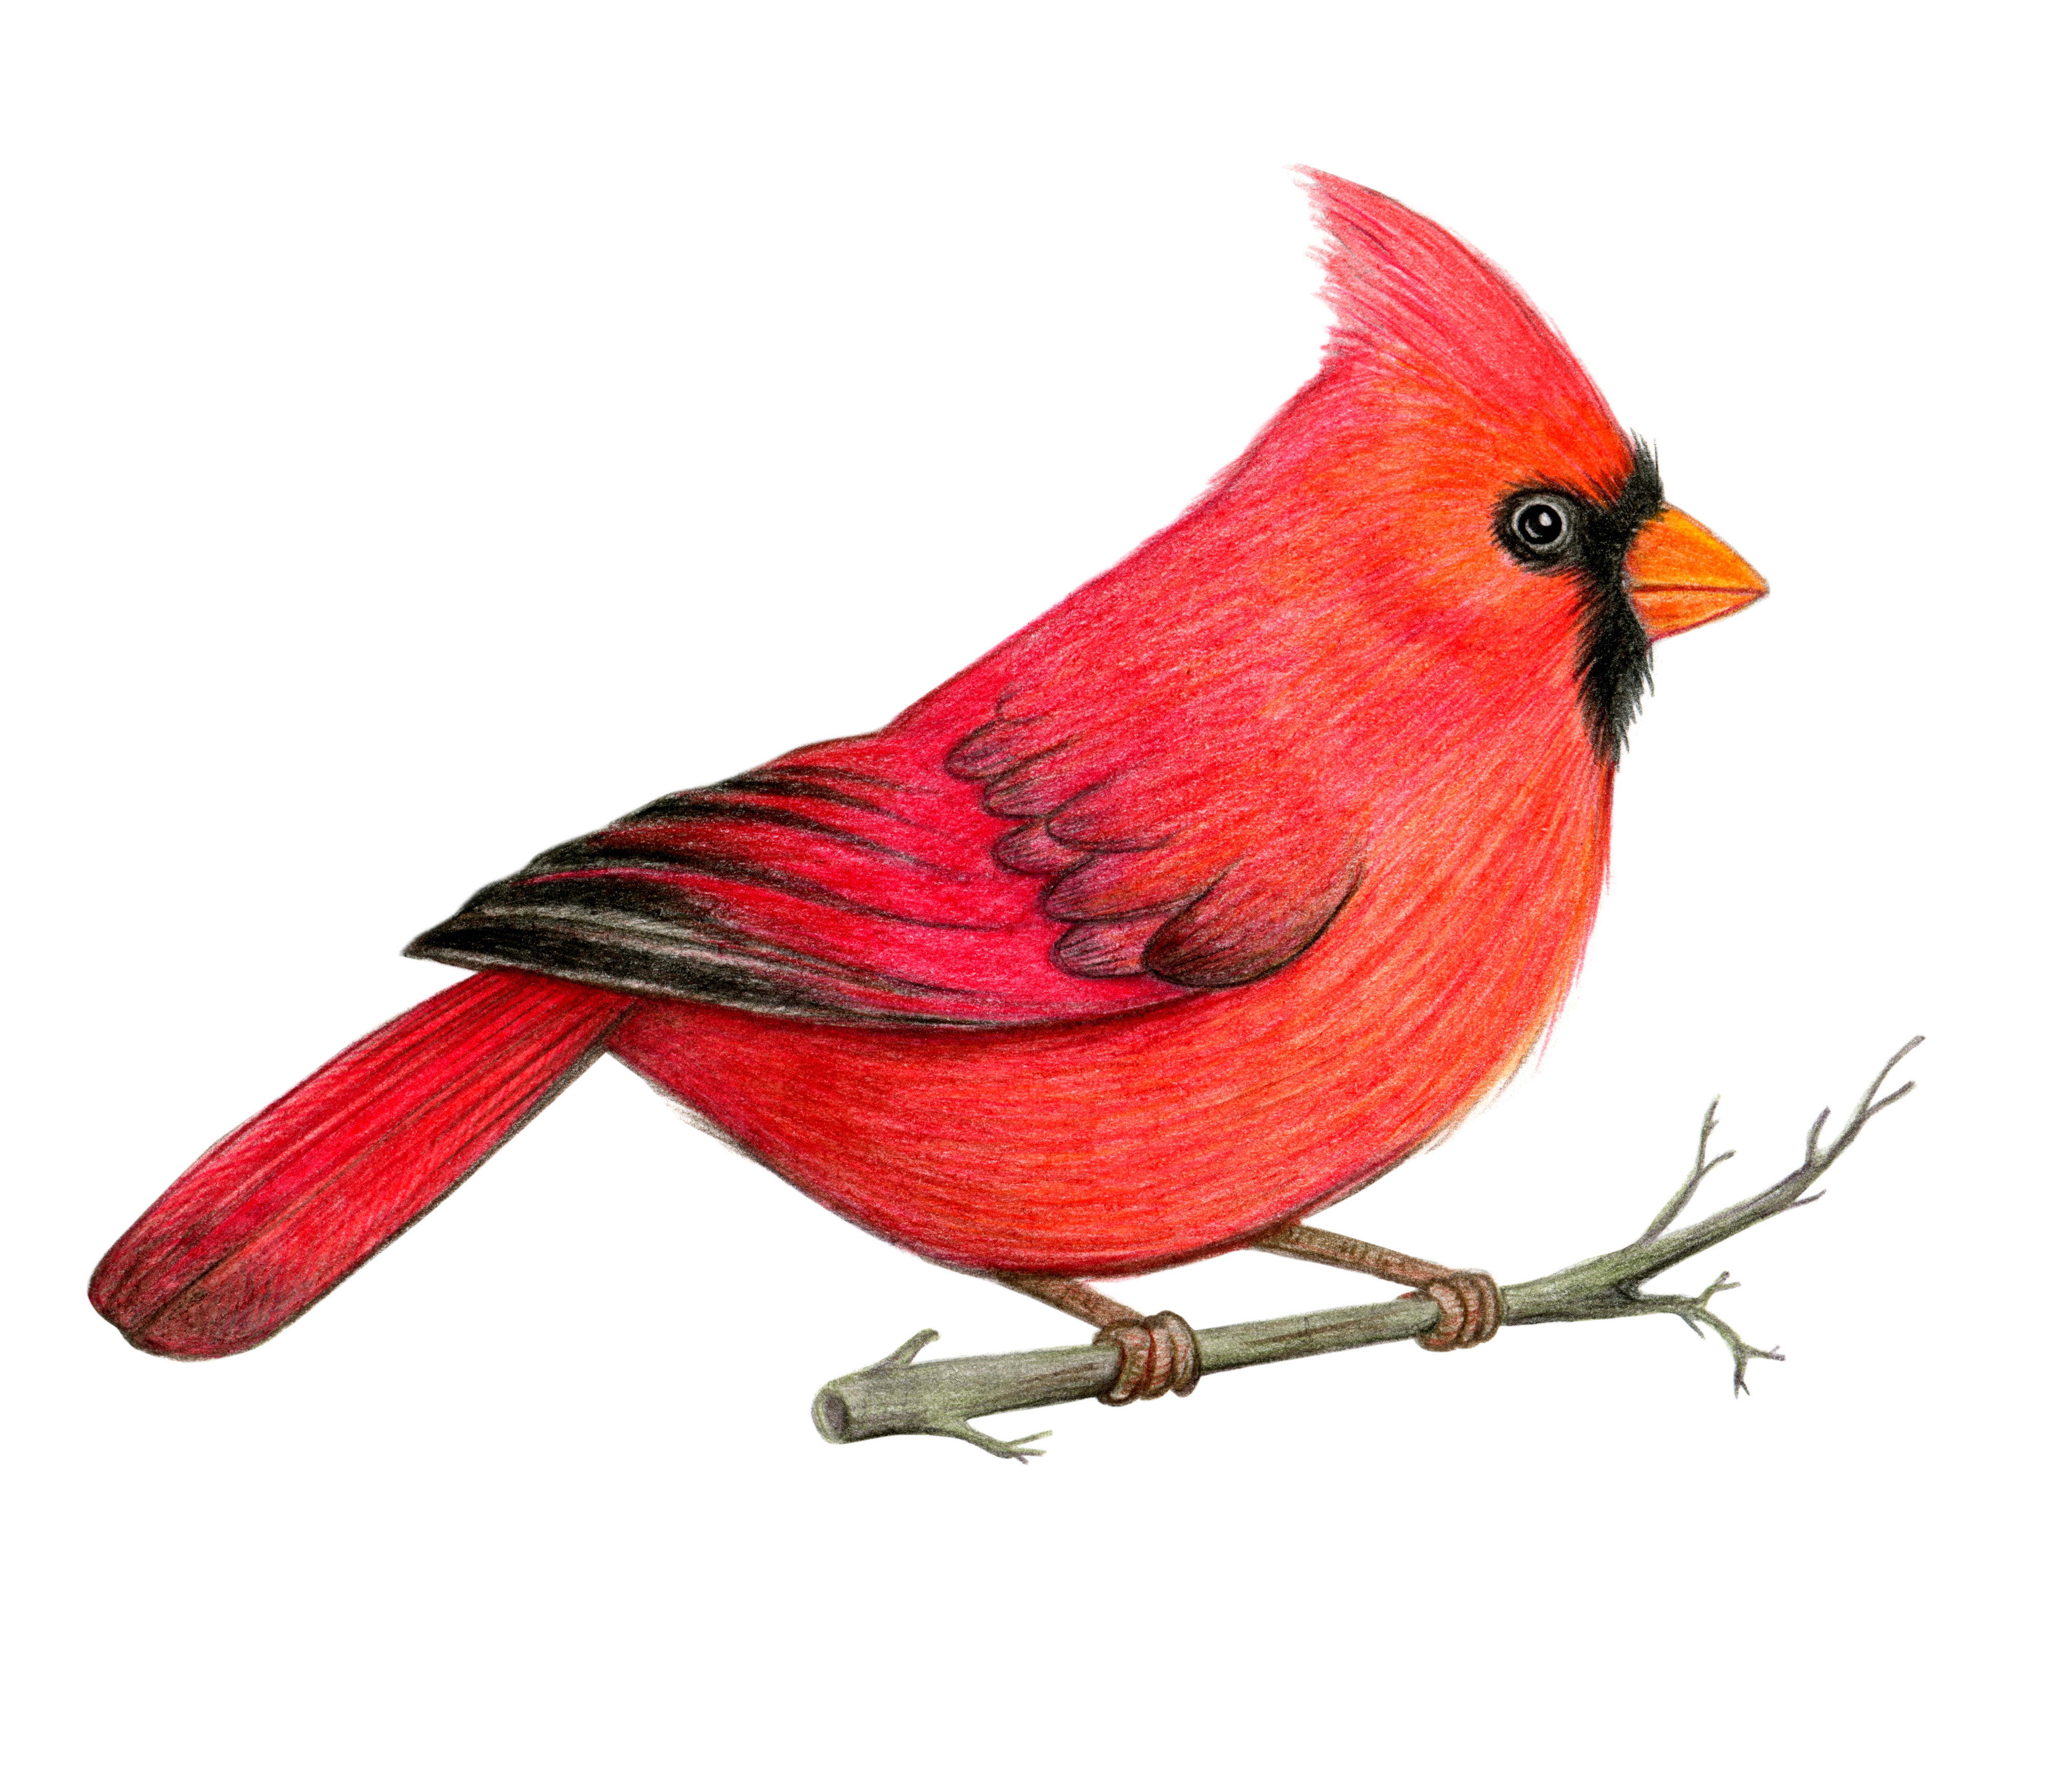 Red cardinal bird hand drawn illustration. Northern cardinal bird. Colored pencil drawing. Color sketch. Colorful illustration | Source: Getty Images